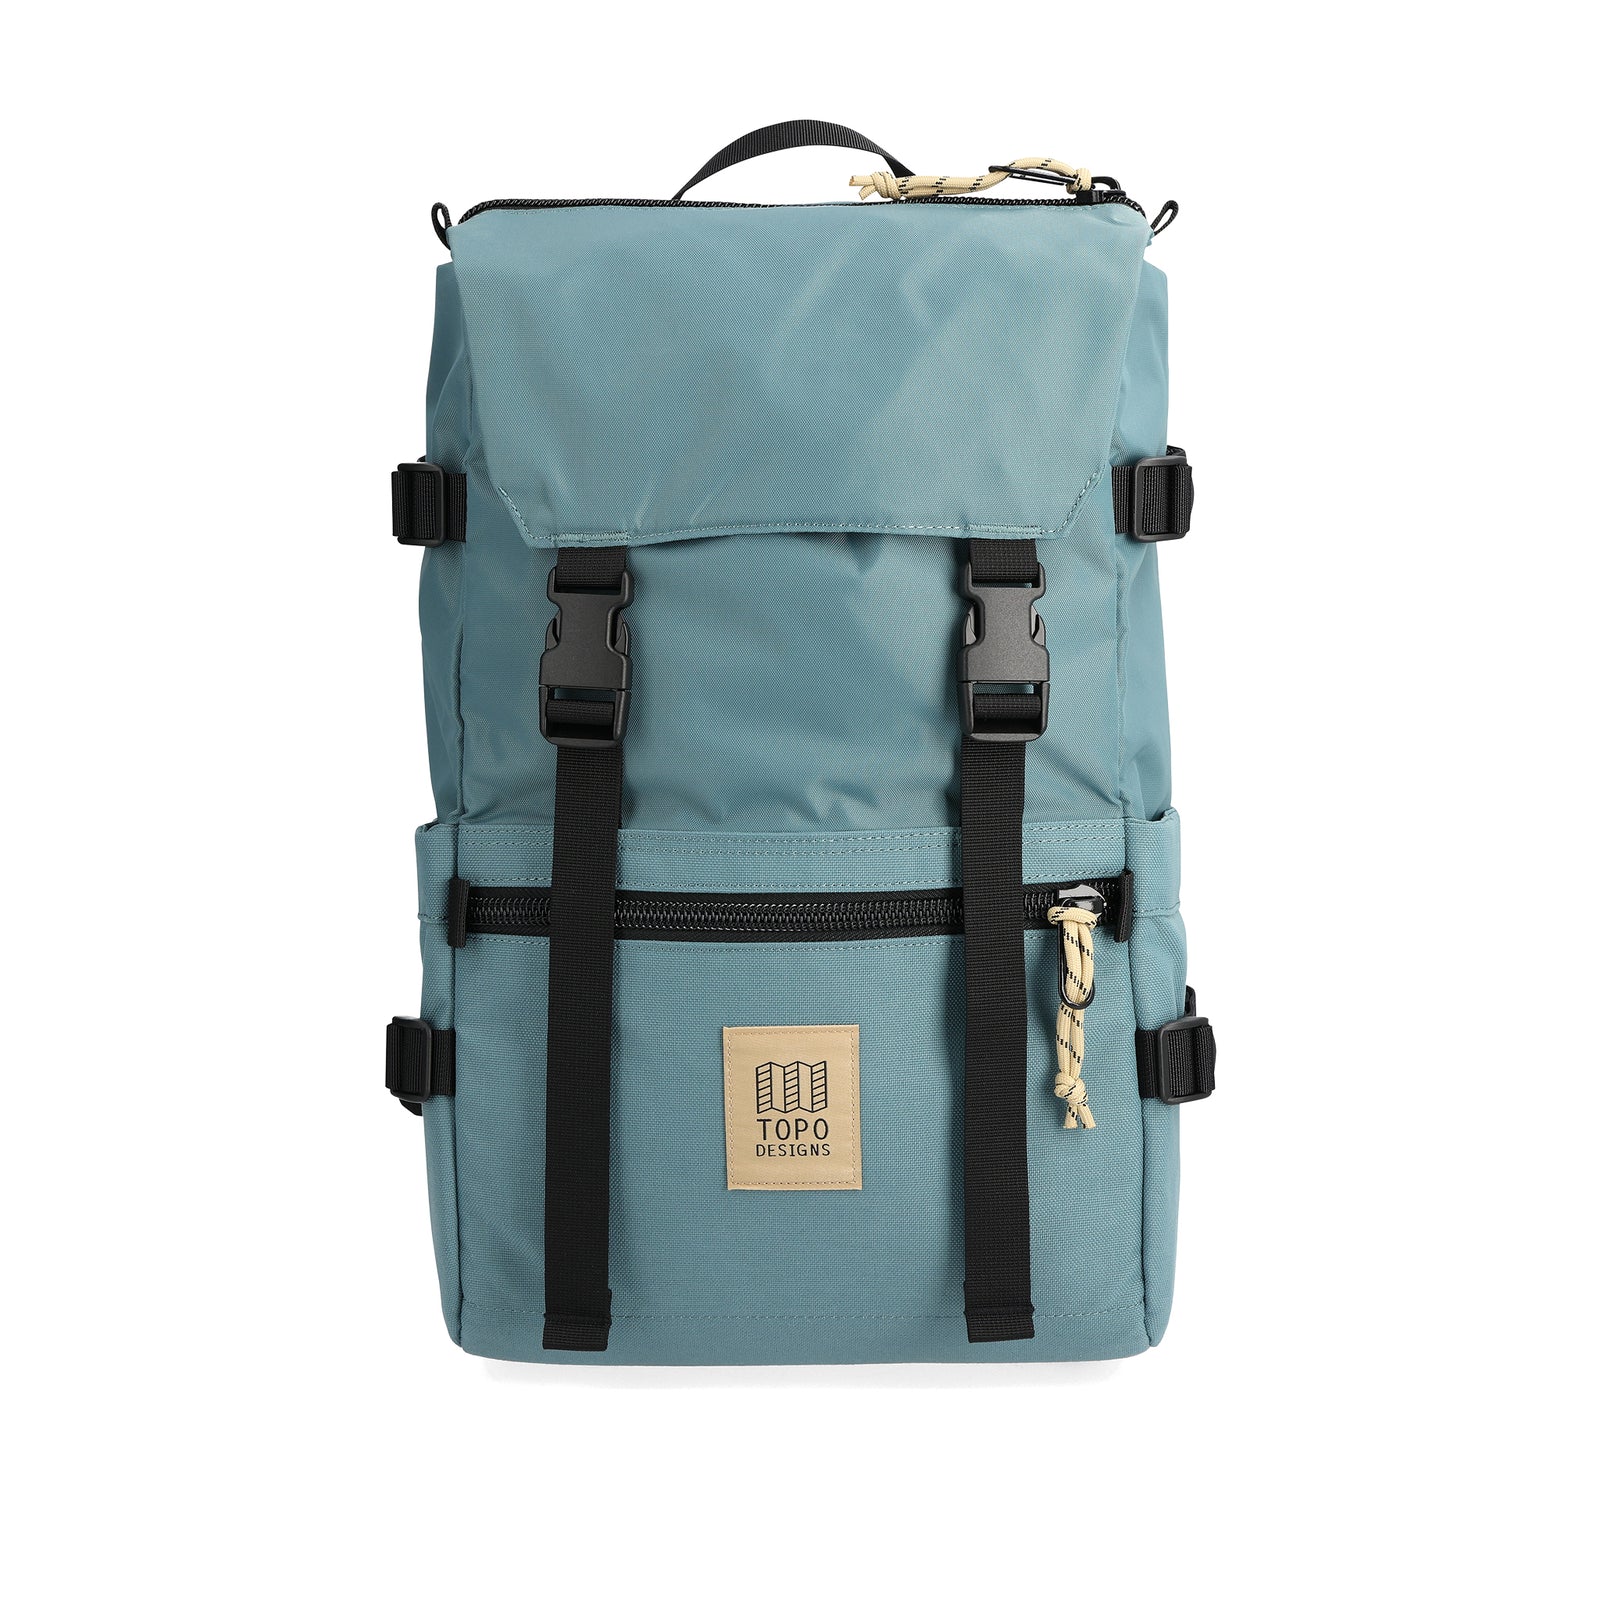 Front View of Topo Designs Rover Pack Classic in "Sea Pine"